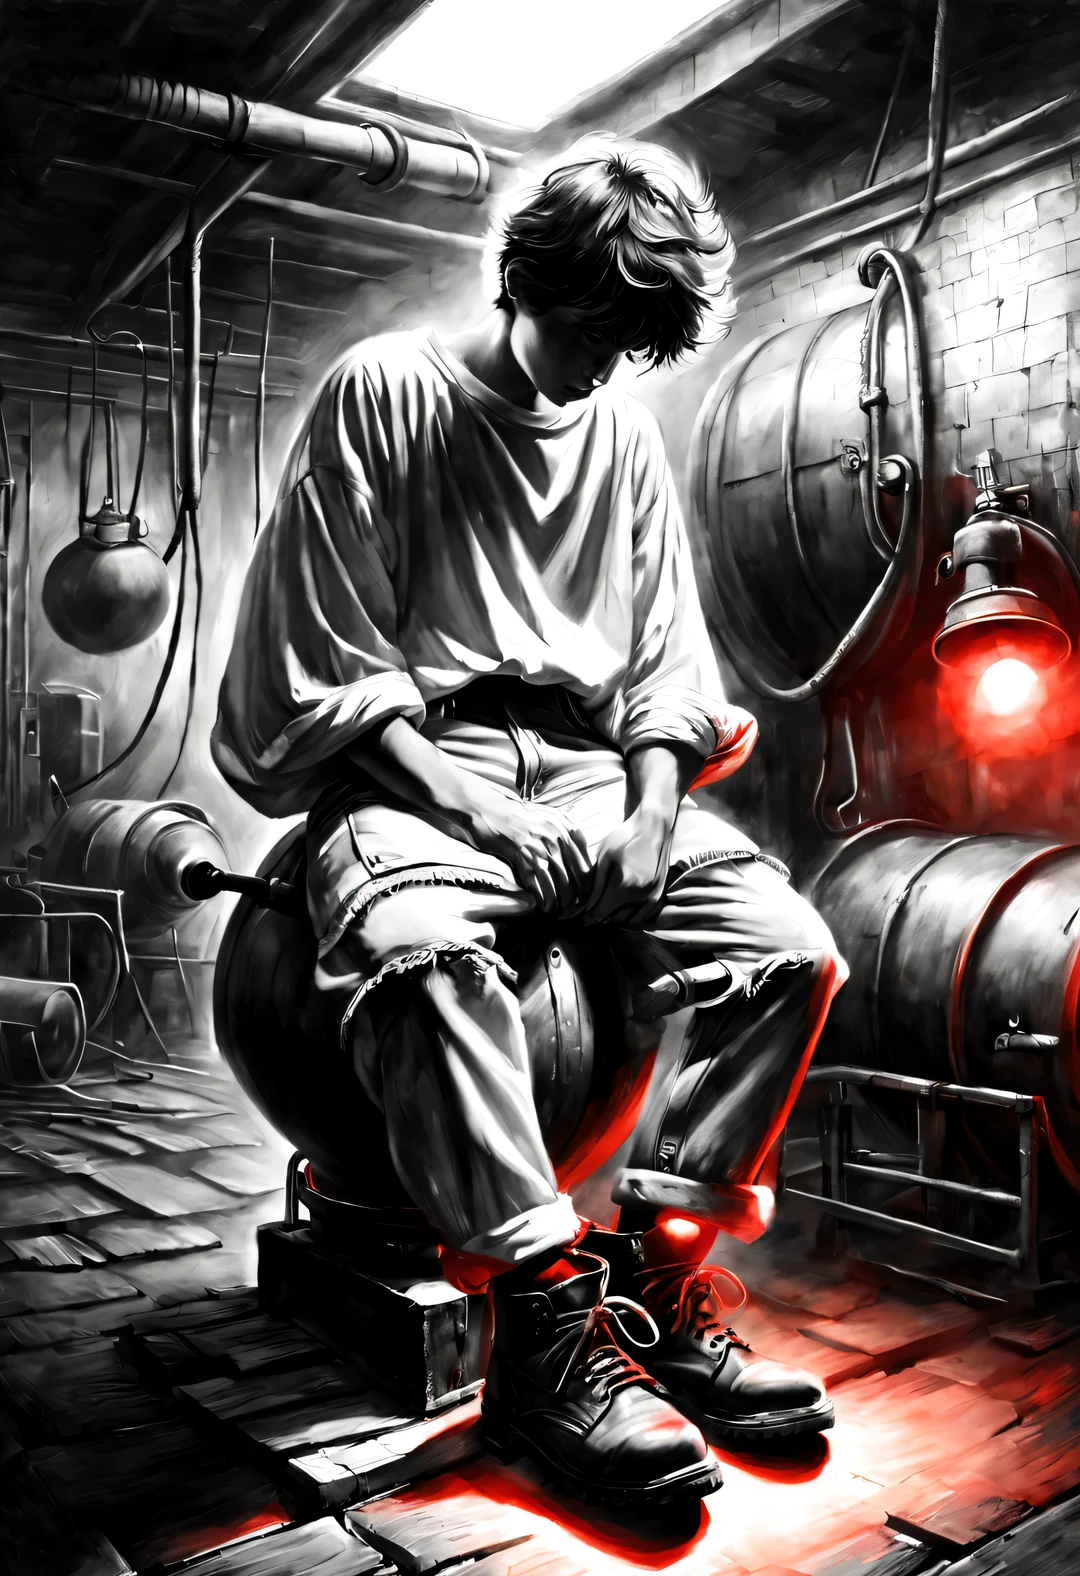 (Graphite painting), (Boy sitting cross-legged in basement，Staring at a big old iron pot), (There is an oversized knife in the old old iron pot: 1.2) (Wearing a white crew neck shirt and jeans), (stubbornly curled up into a short), decadent and lazy, (perfect face), moving shoes, (Industrial lights on the roof emit a faint red light: 1.34),
background: many, Many old bottles and glasses flew in the basement, The walls are tattered, industrial style, retro shabby,
90's anime style, Bold silhouettes, Graphic arts, line art, black and white, line art with pen pressure, Pen pressure sketch, Calligraphy pen with pen pressure, G pen style，With pen pressure, Hand drawn thick lines, high contrast, ig model,